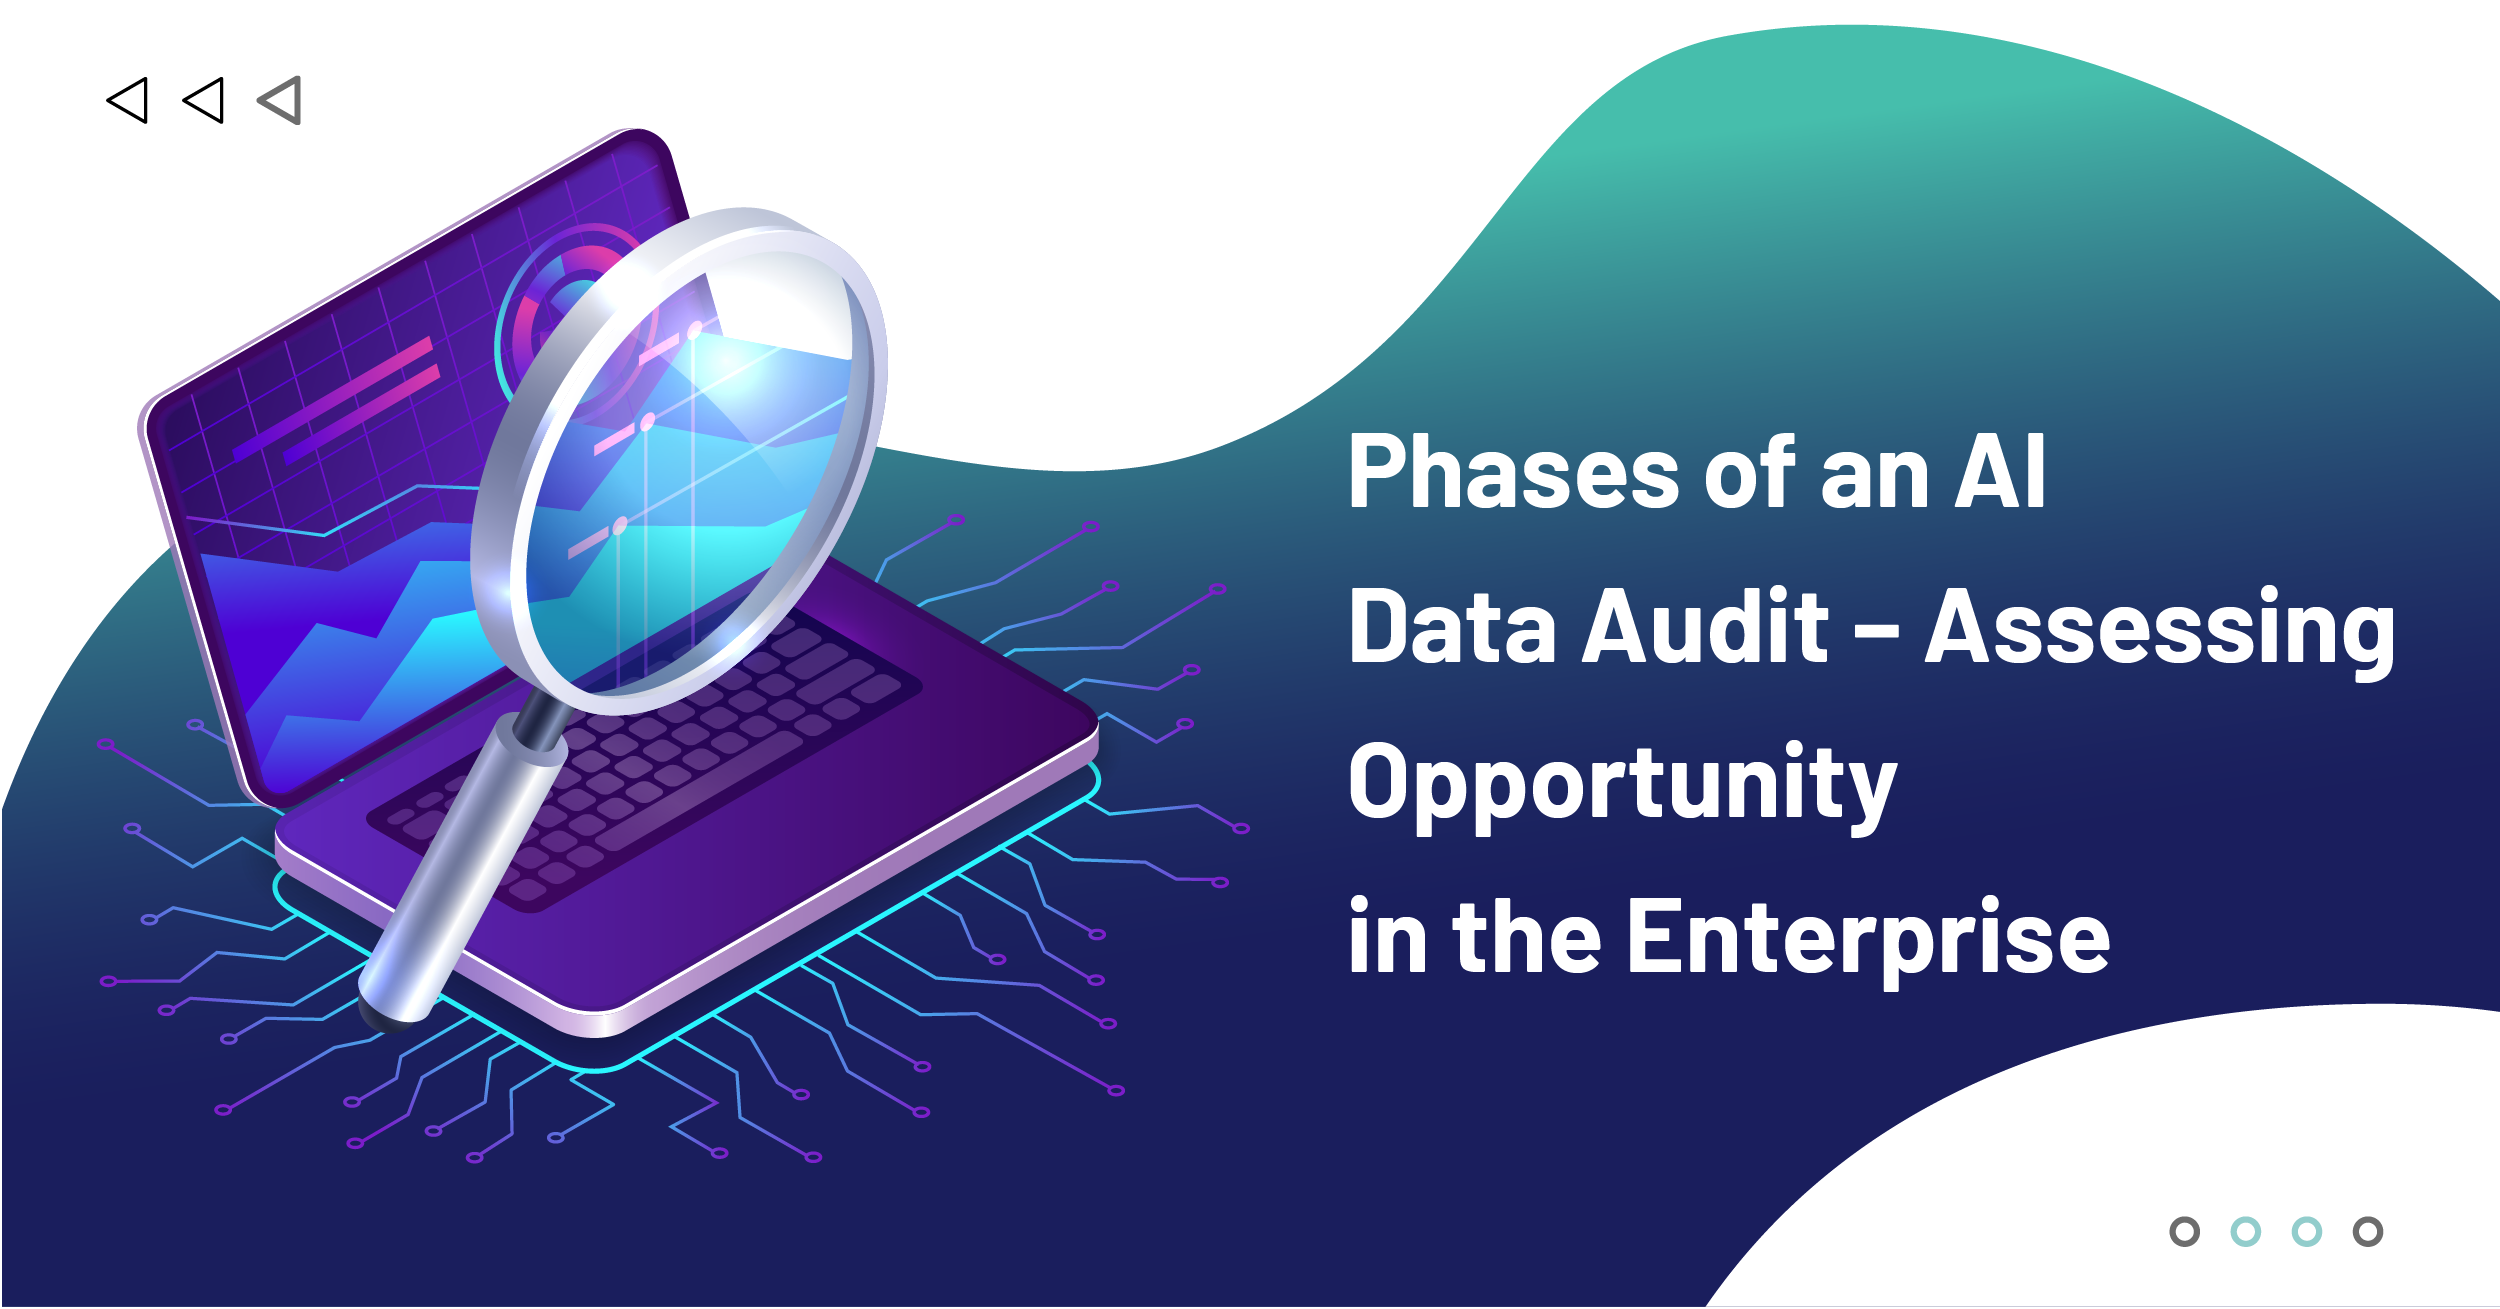 Phases of an AI Data Audit – Assessing Opportunity in the Enterprise